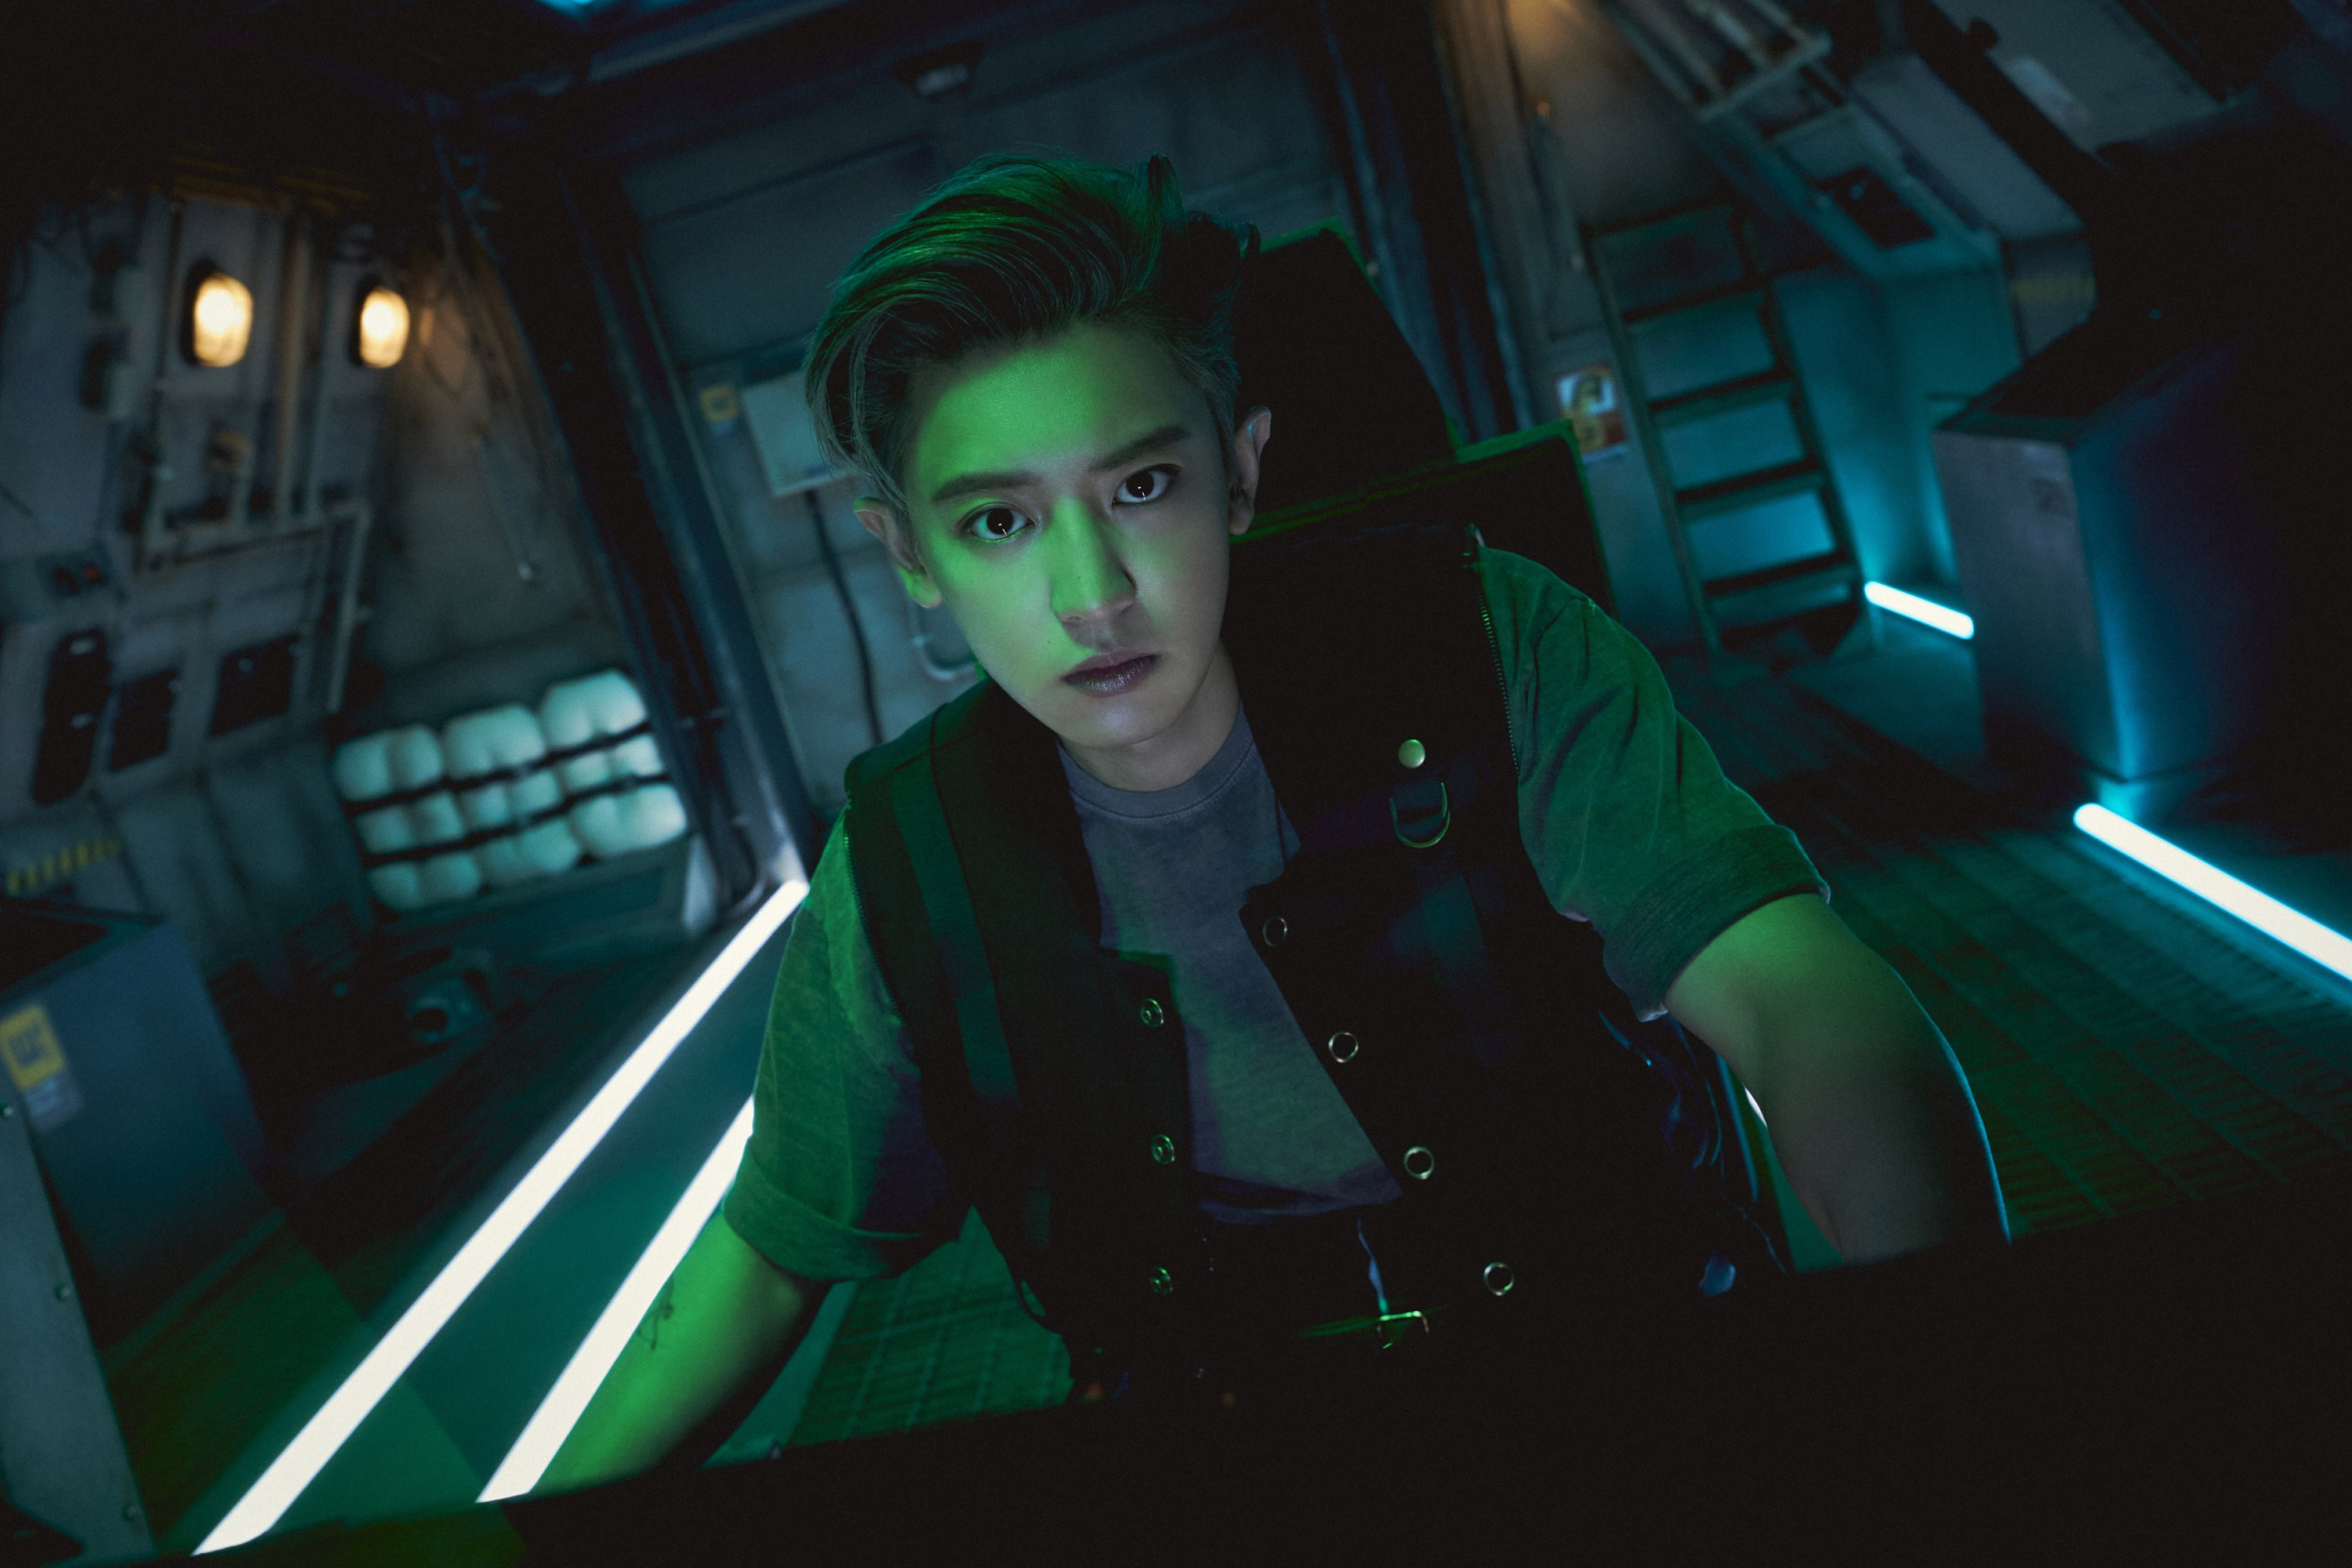 EXO Chanyeol EP 02. ONE GIANT LEAP Teasers [Don't Fight The Feeling]